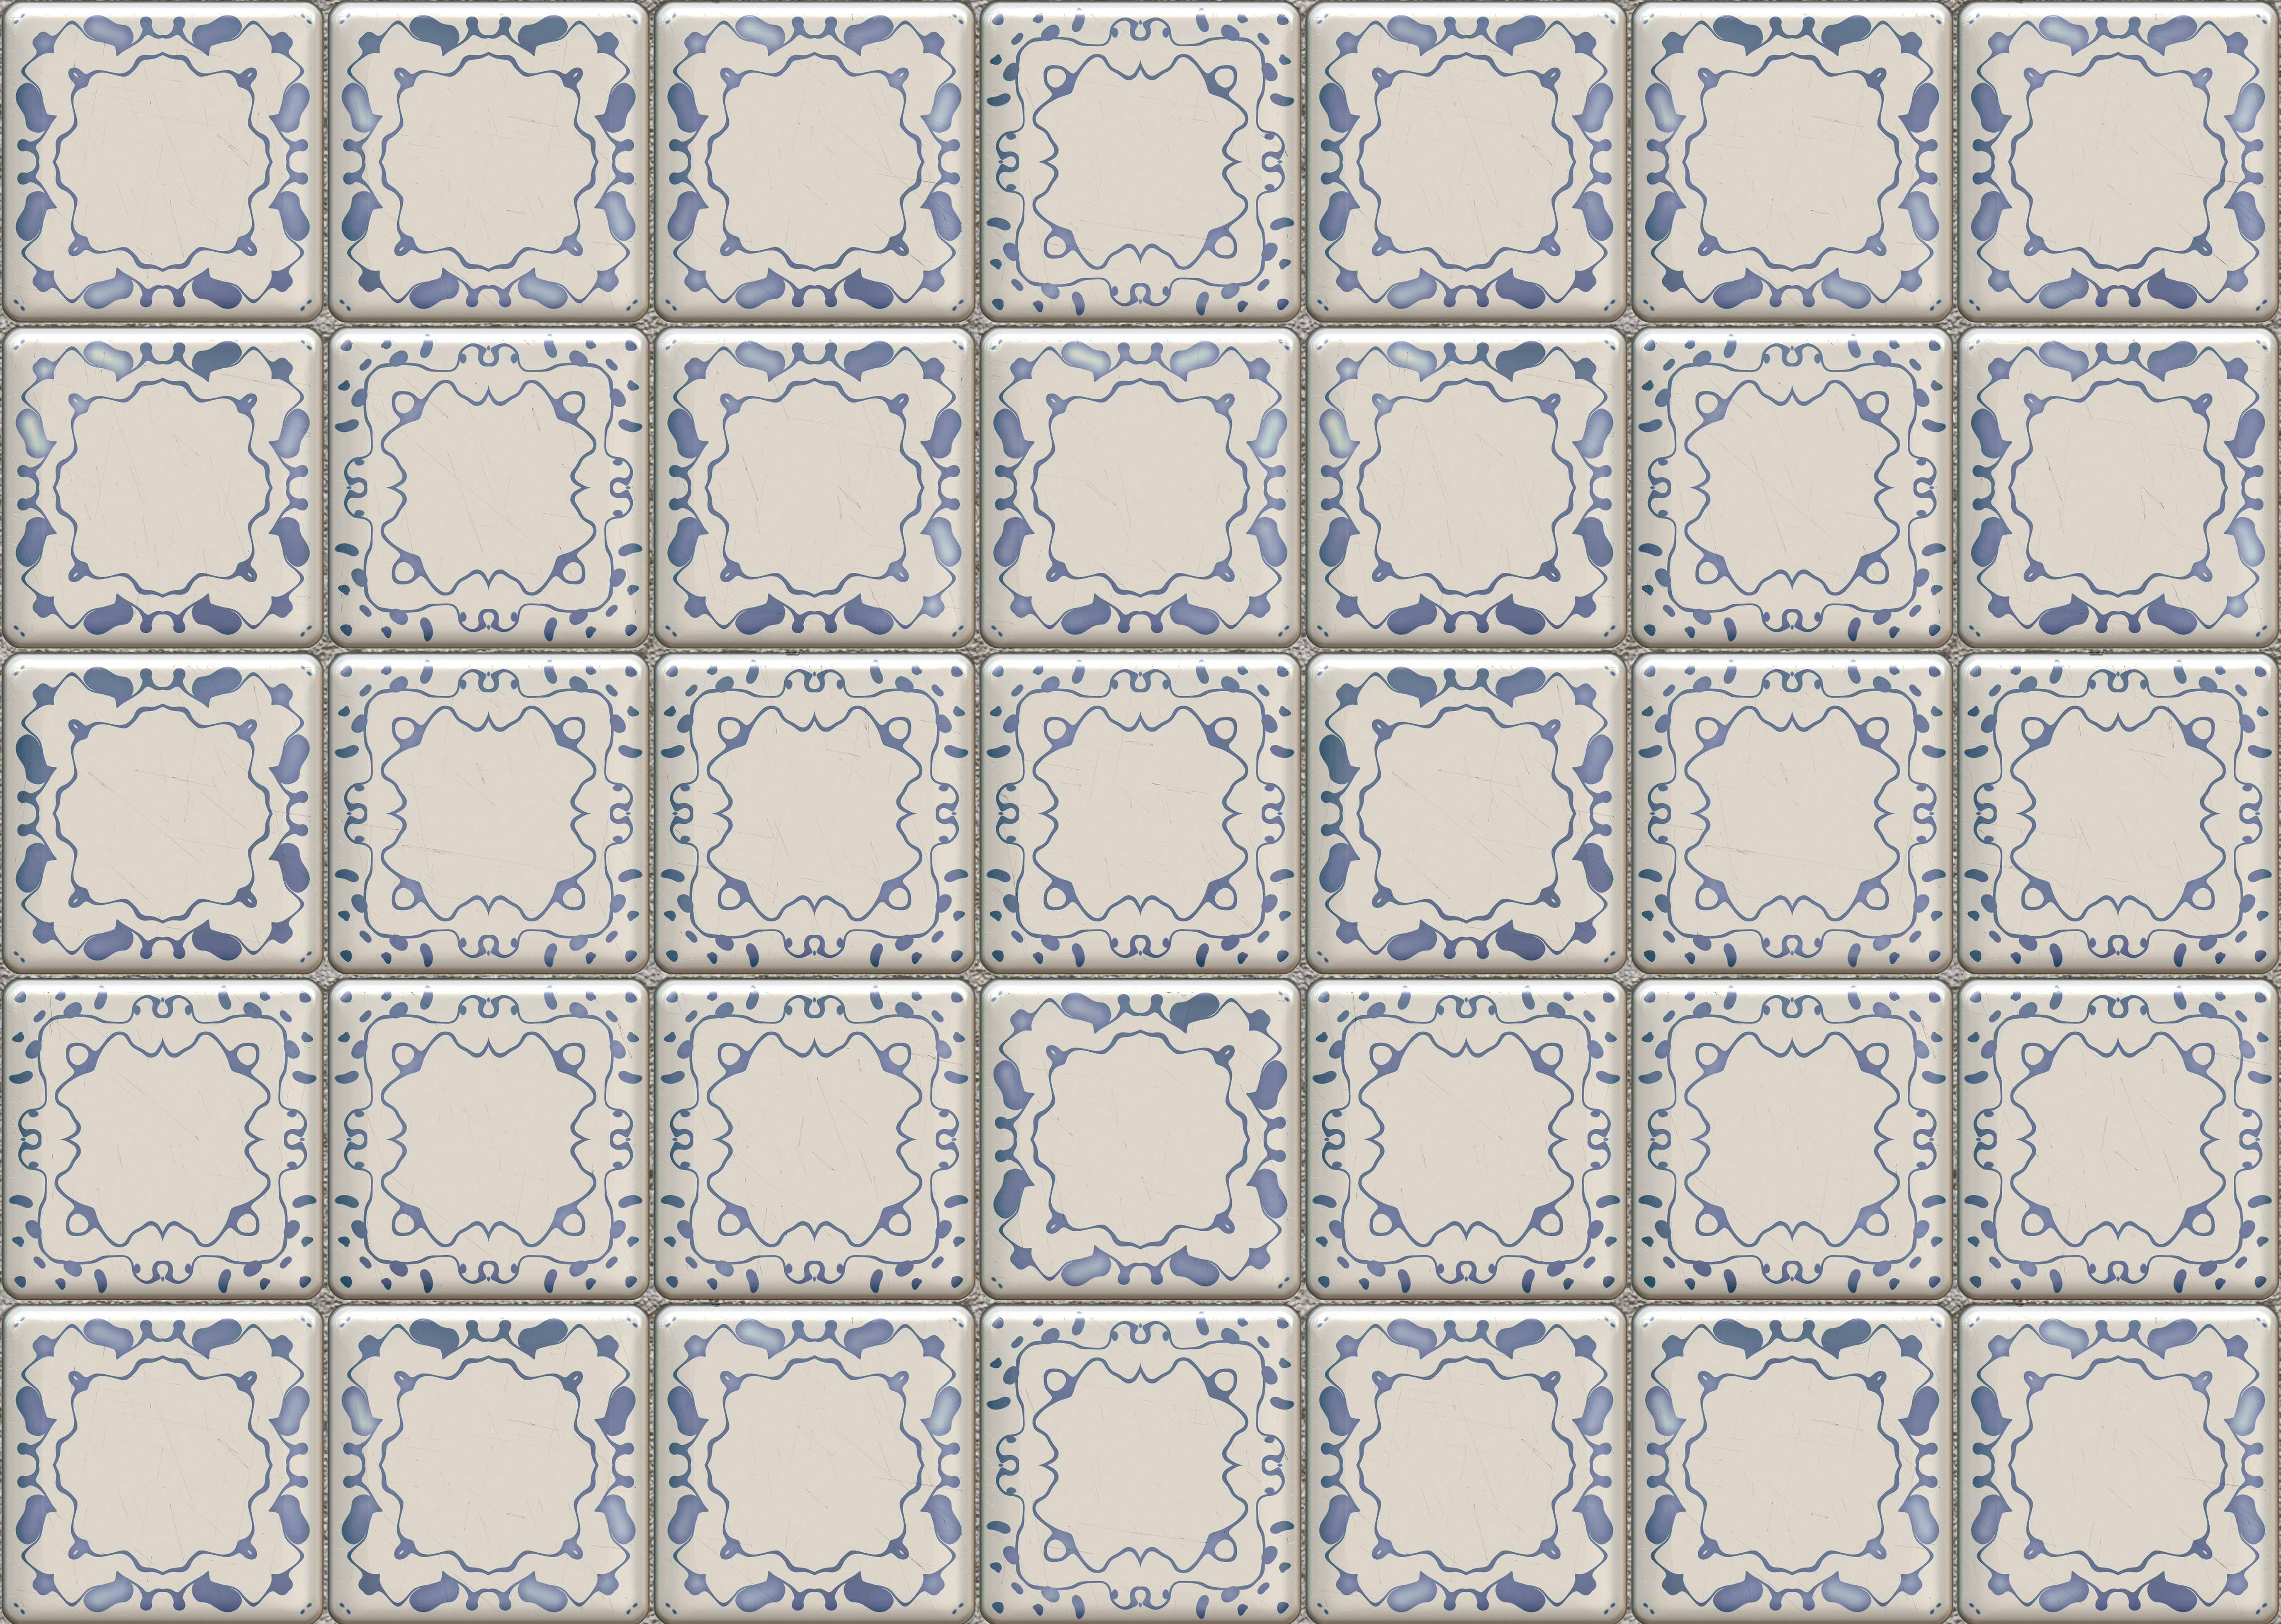 generated seamless tile background texture | www.myfreetextures.com